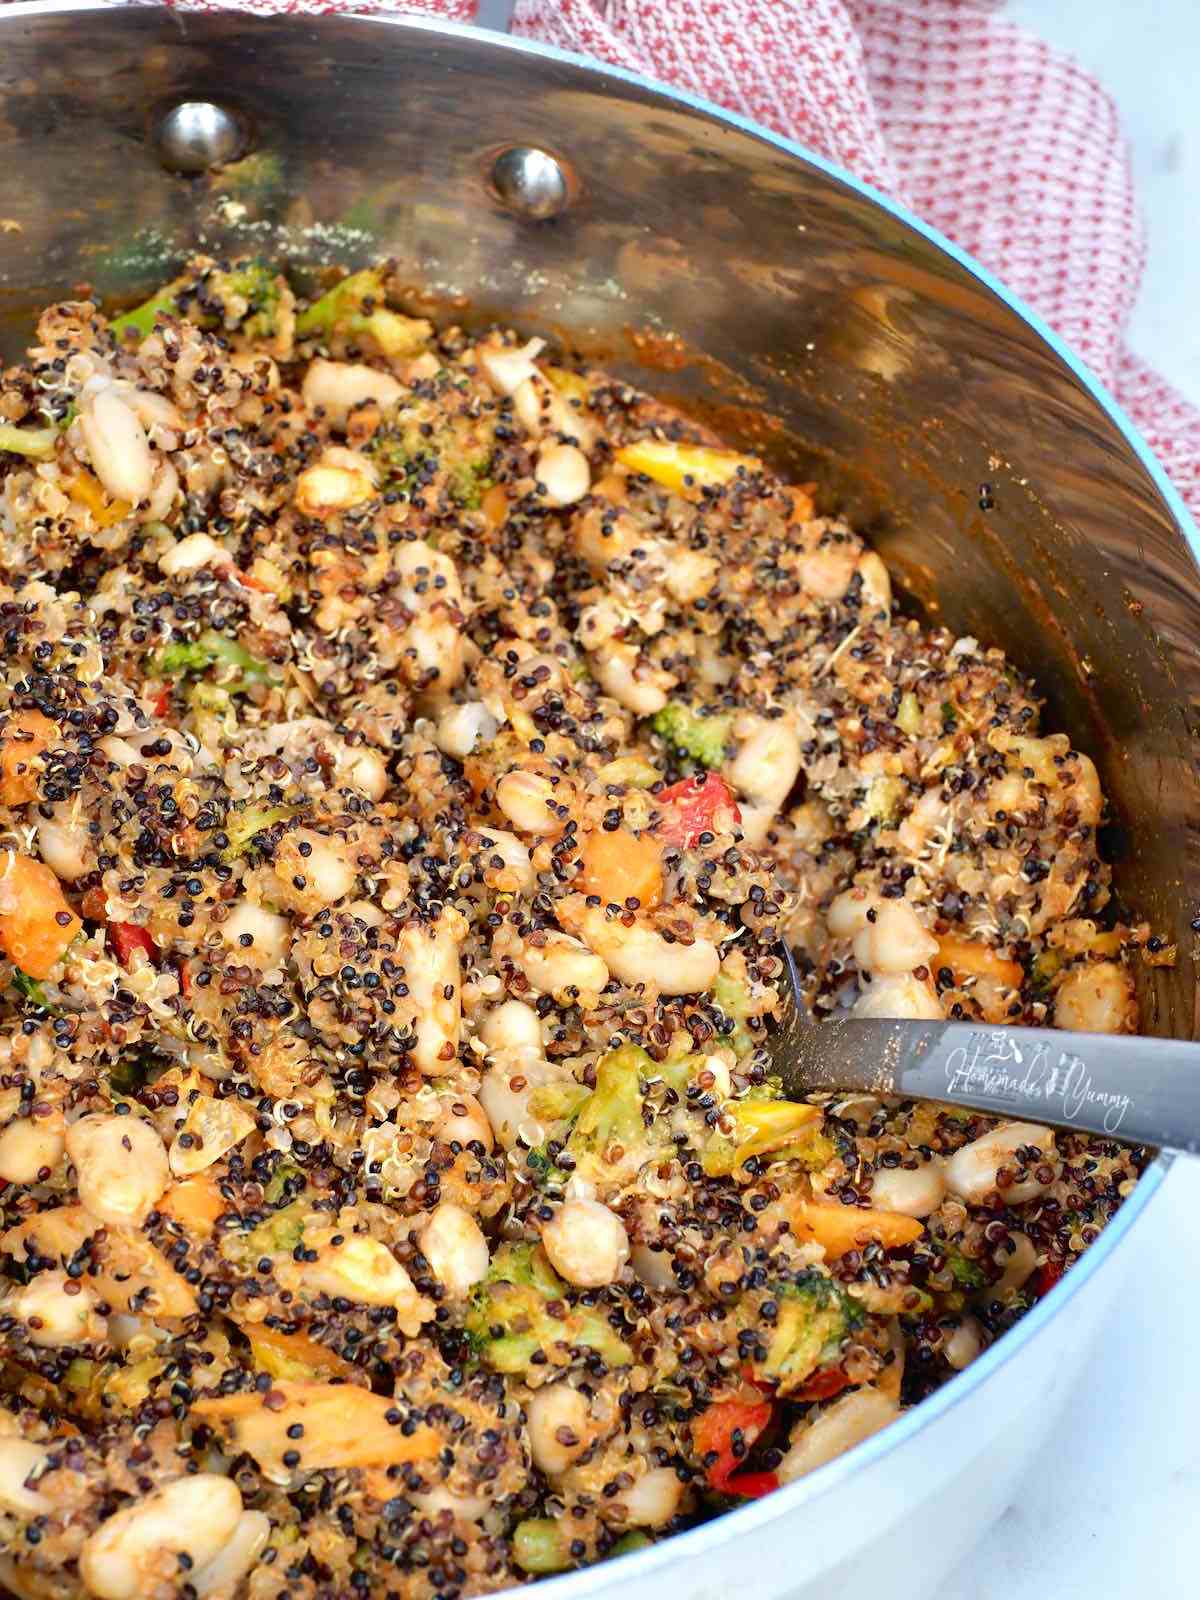 Baked casserole with quinoa, vegetables and beans.